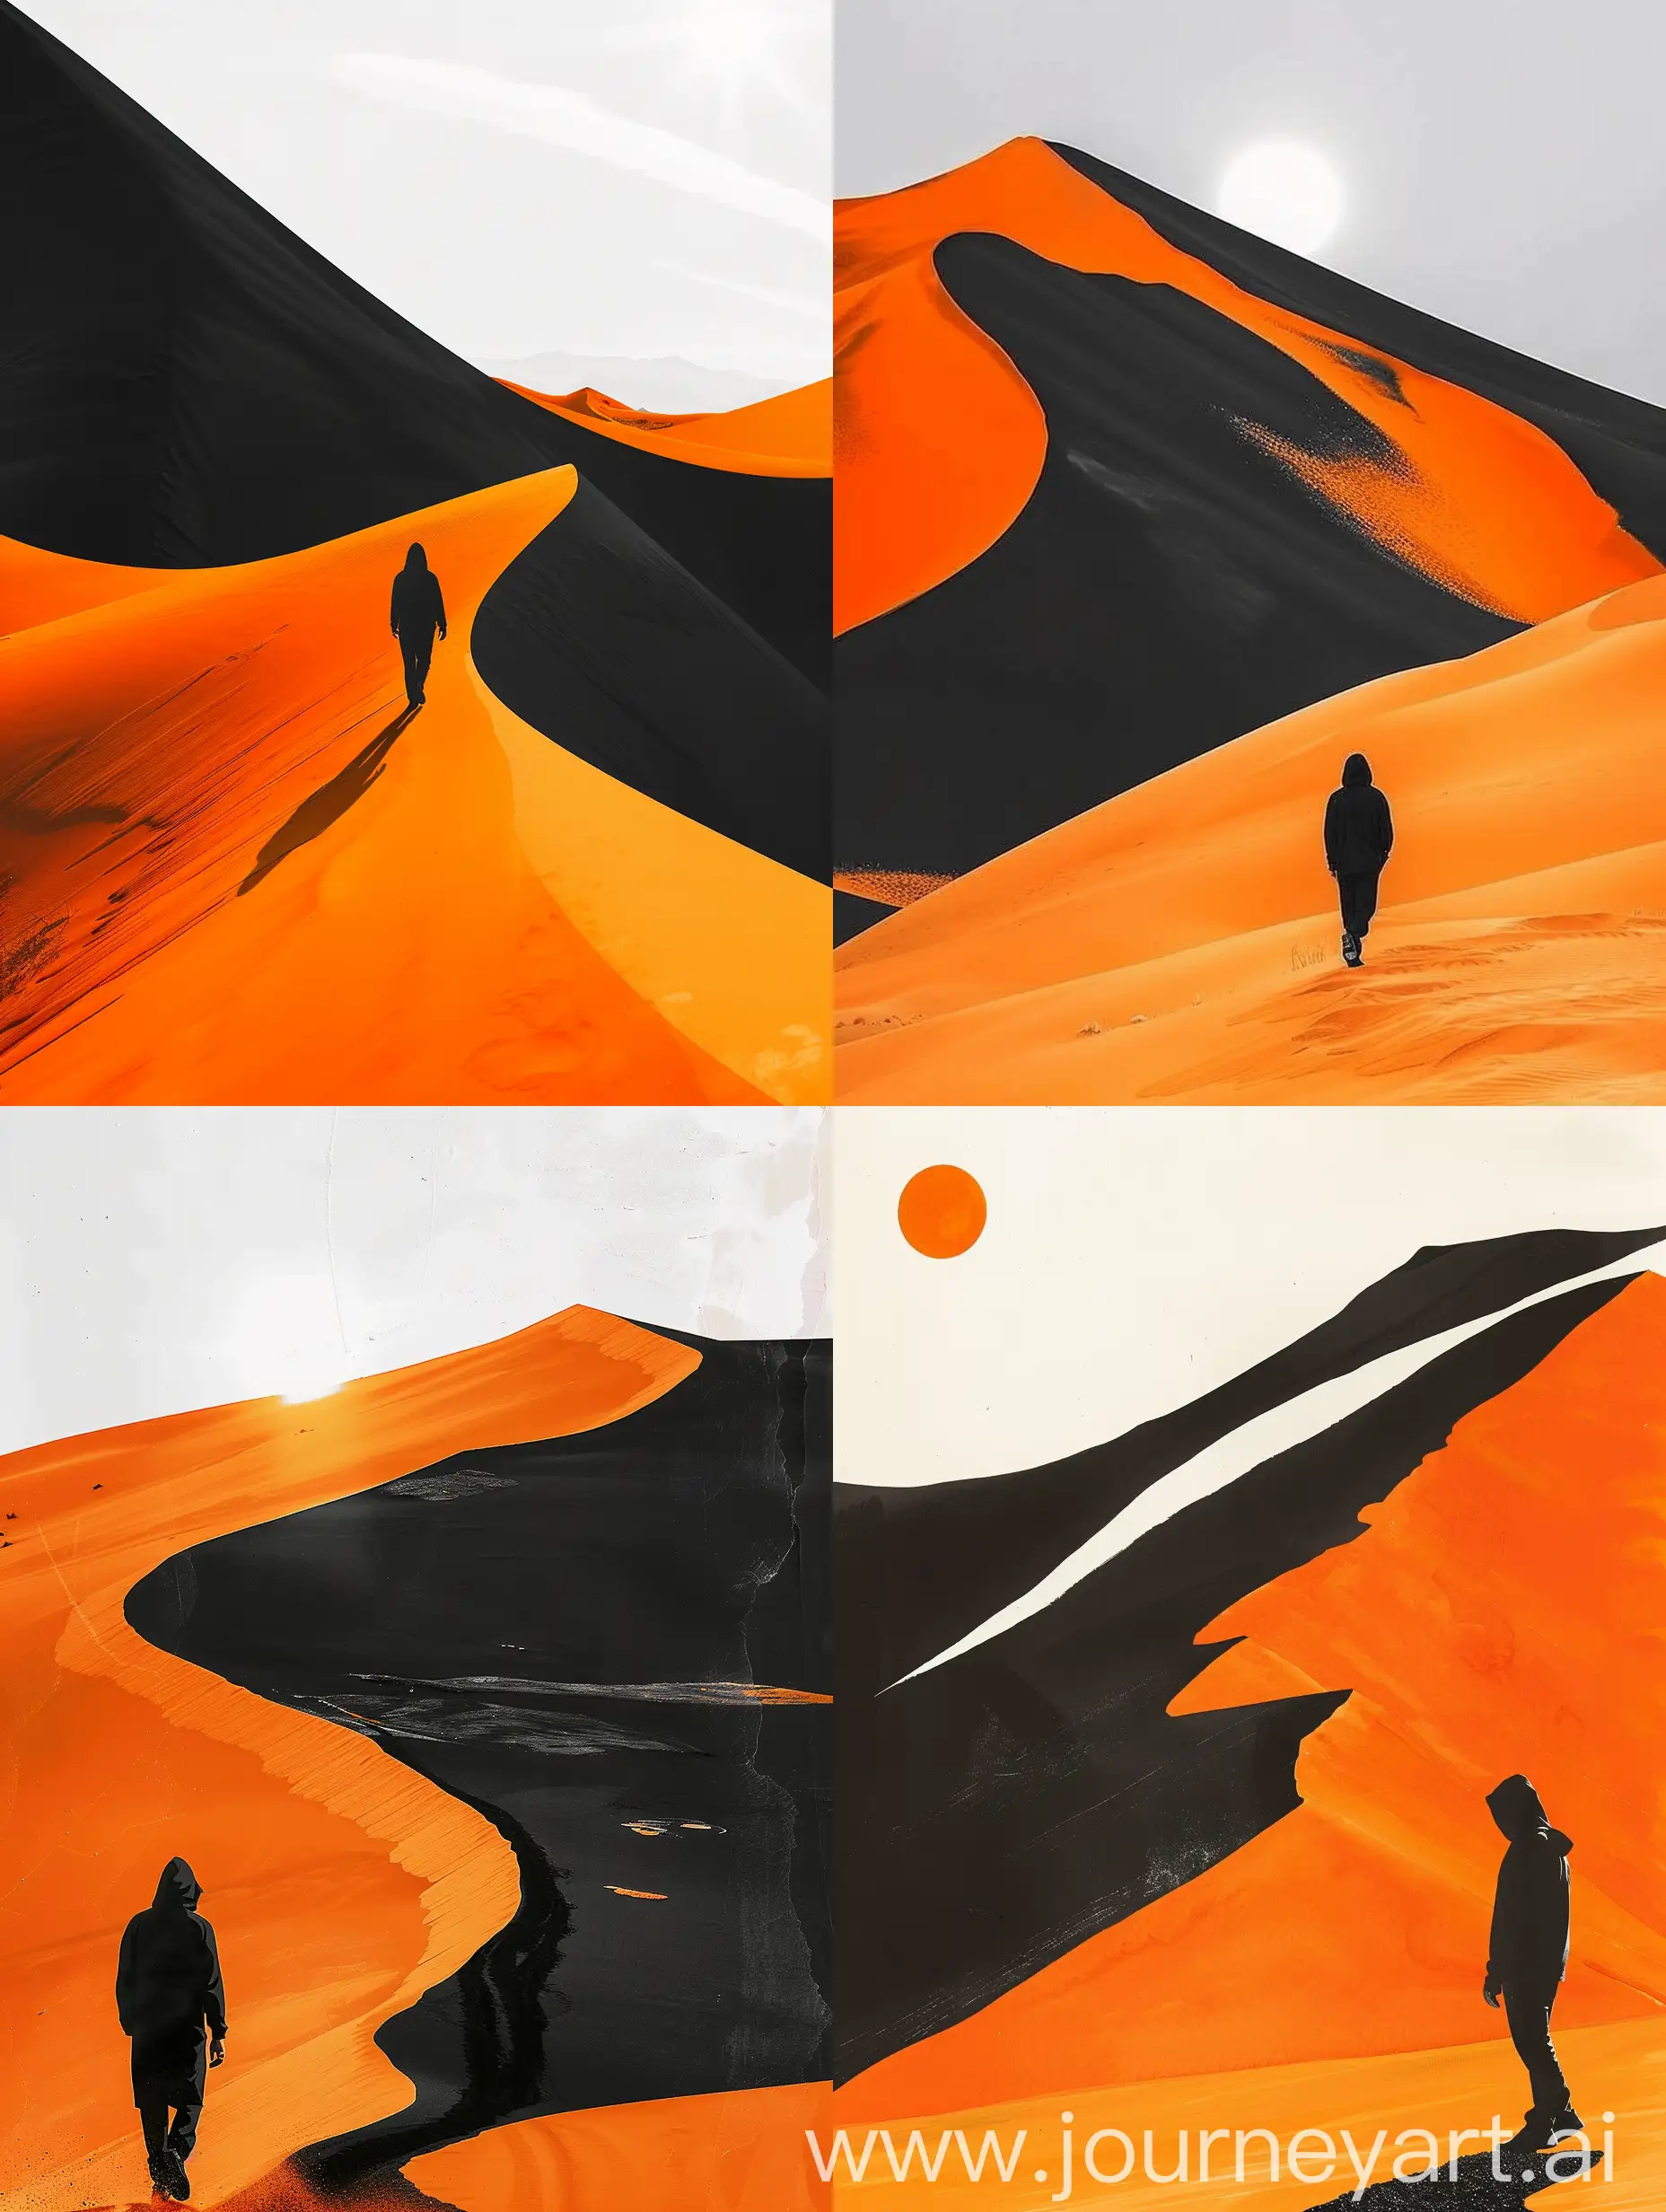 Someone in a black hoodie walking in the desert dunes in the distance, orange and black color is predominant, part of the dune is black and part is orange, part of the dune is shaded in black, the sun is shining white and yellow on the hill, theme is predominant in orange and black